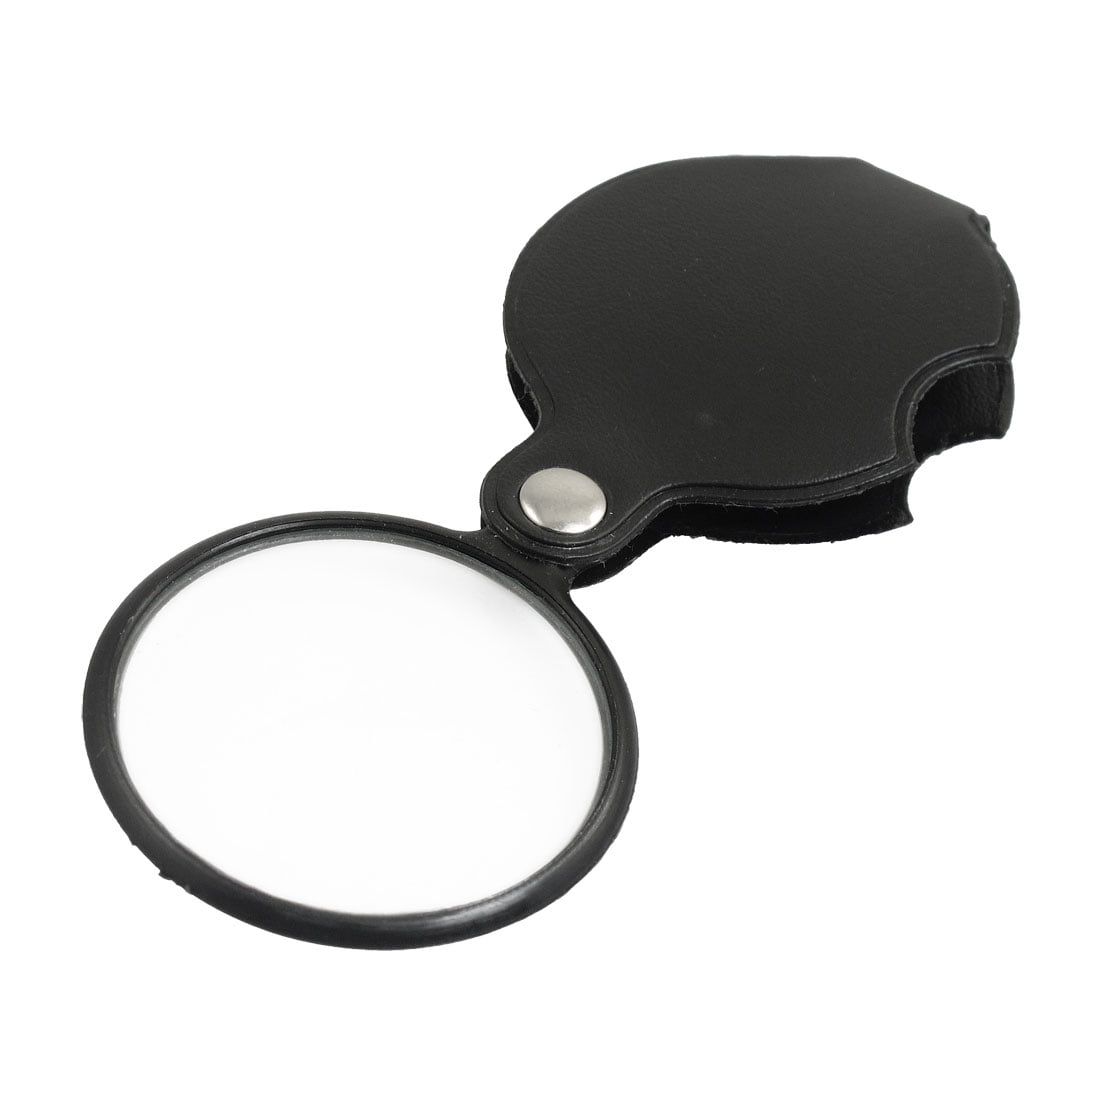 New Pocket Folding Spiegel Magnifier Magnifying Glass 10X Loupe Round Cover 50mm 